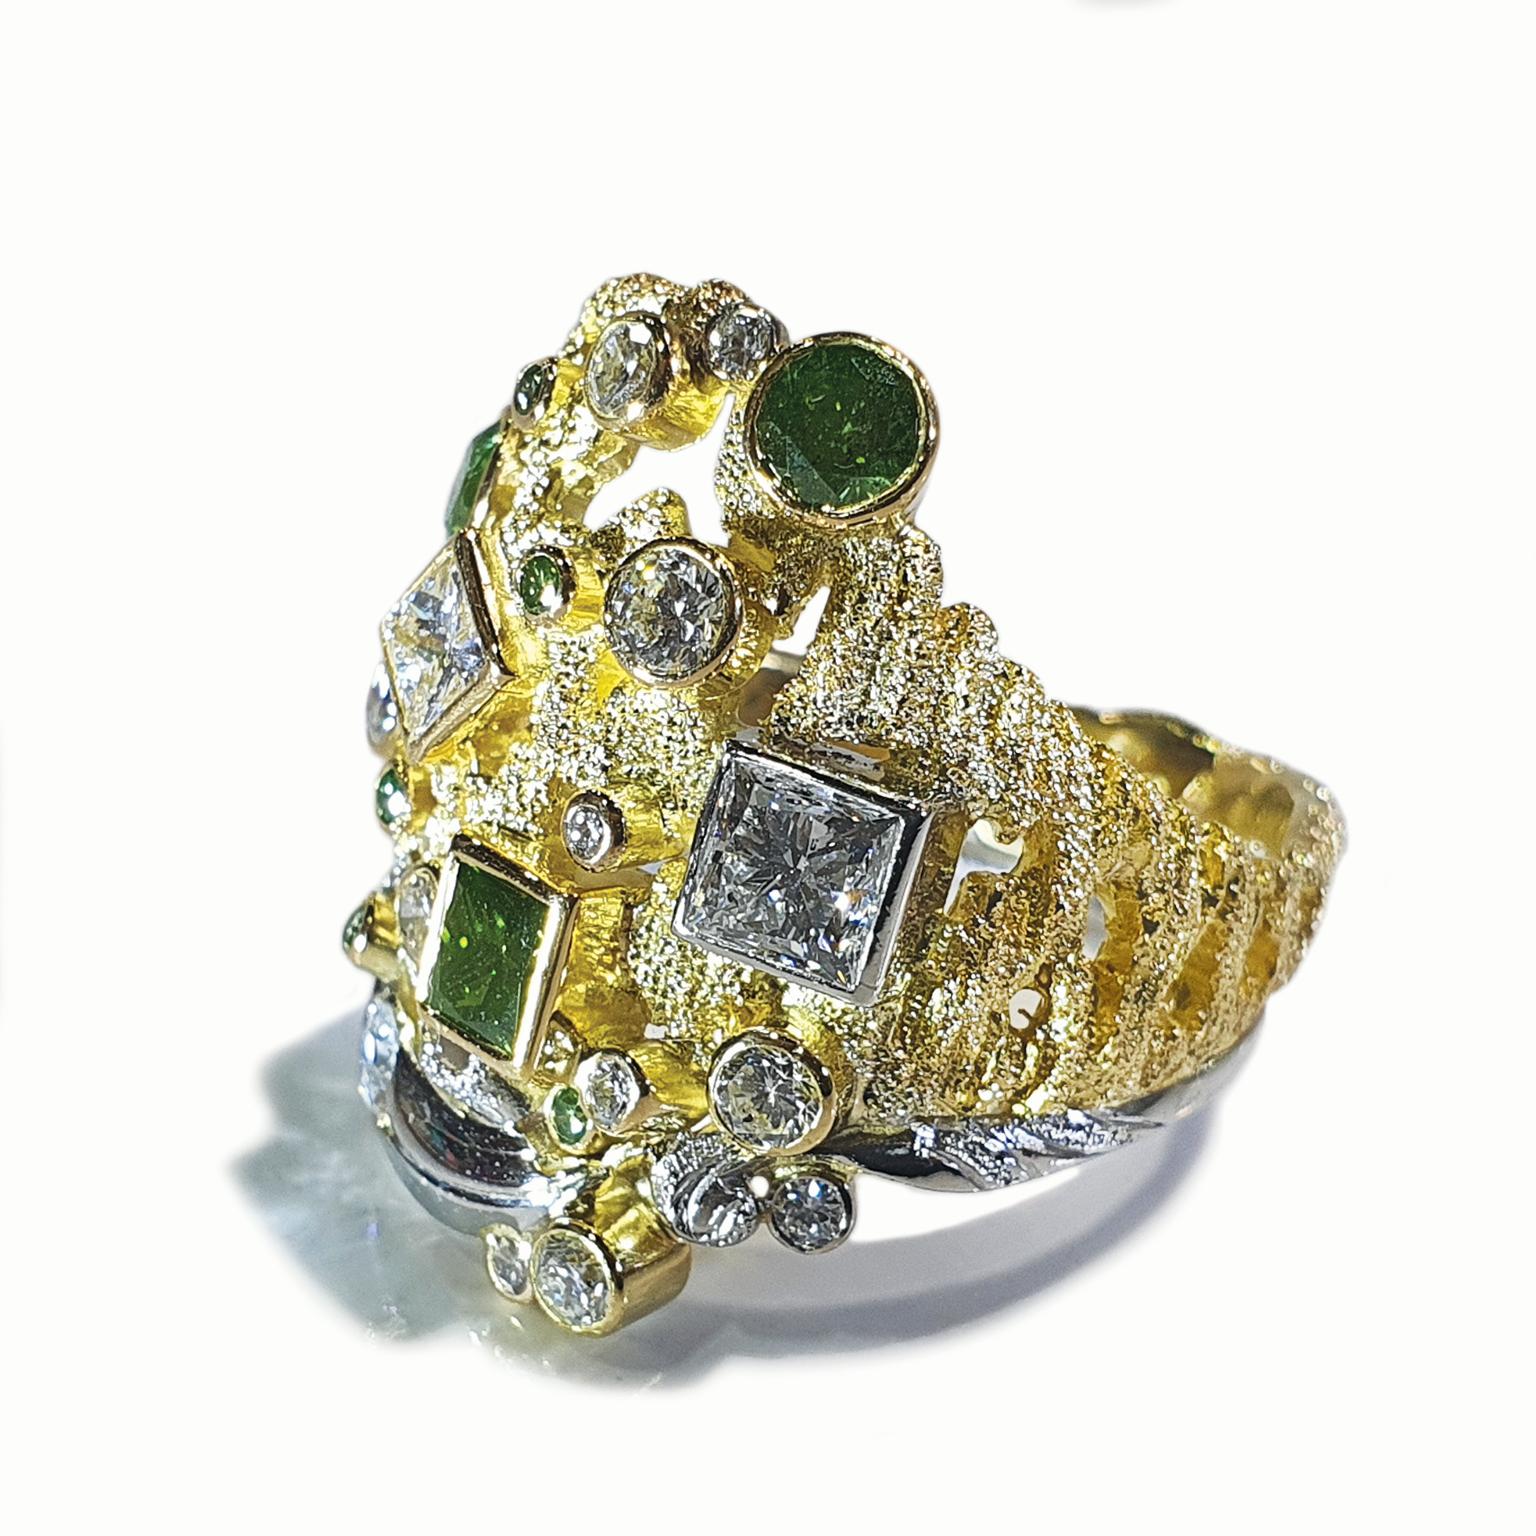 Paul Amey’s “Bark” green and white diamond ring was crafted from 18K yellow gold and platinum.   The “Bark” ring features green colour enhanced natural diamonds and the stylized “Bark” is finished with Paul Amey’s signature texture. The top of the